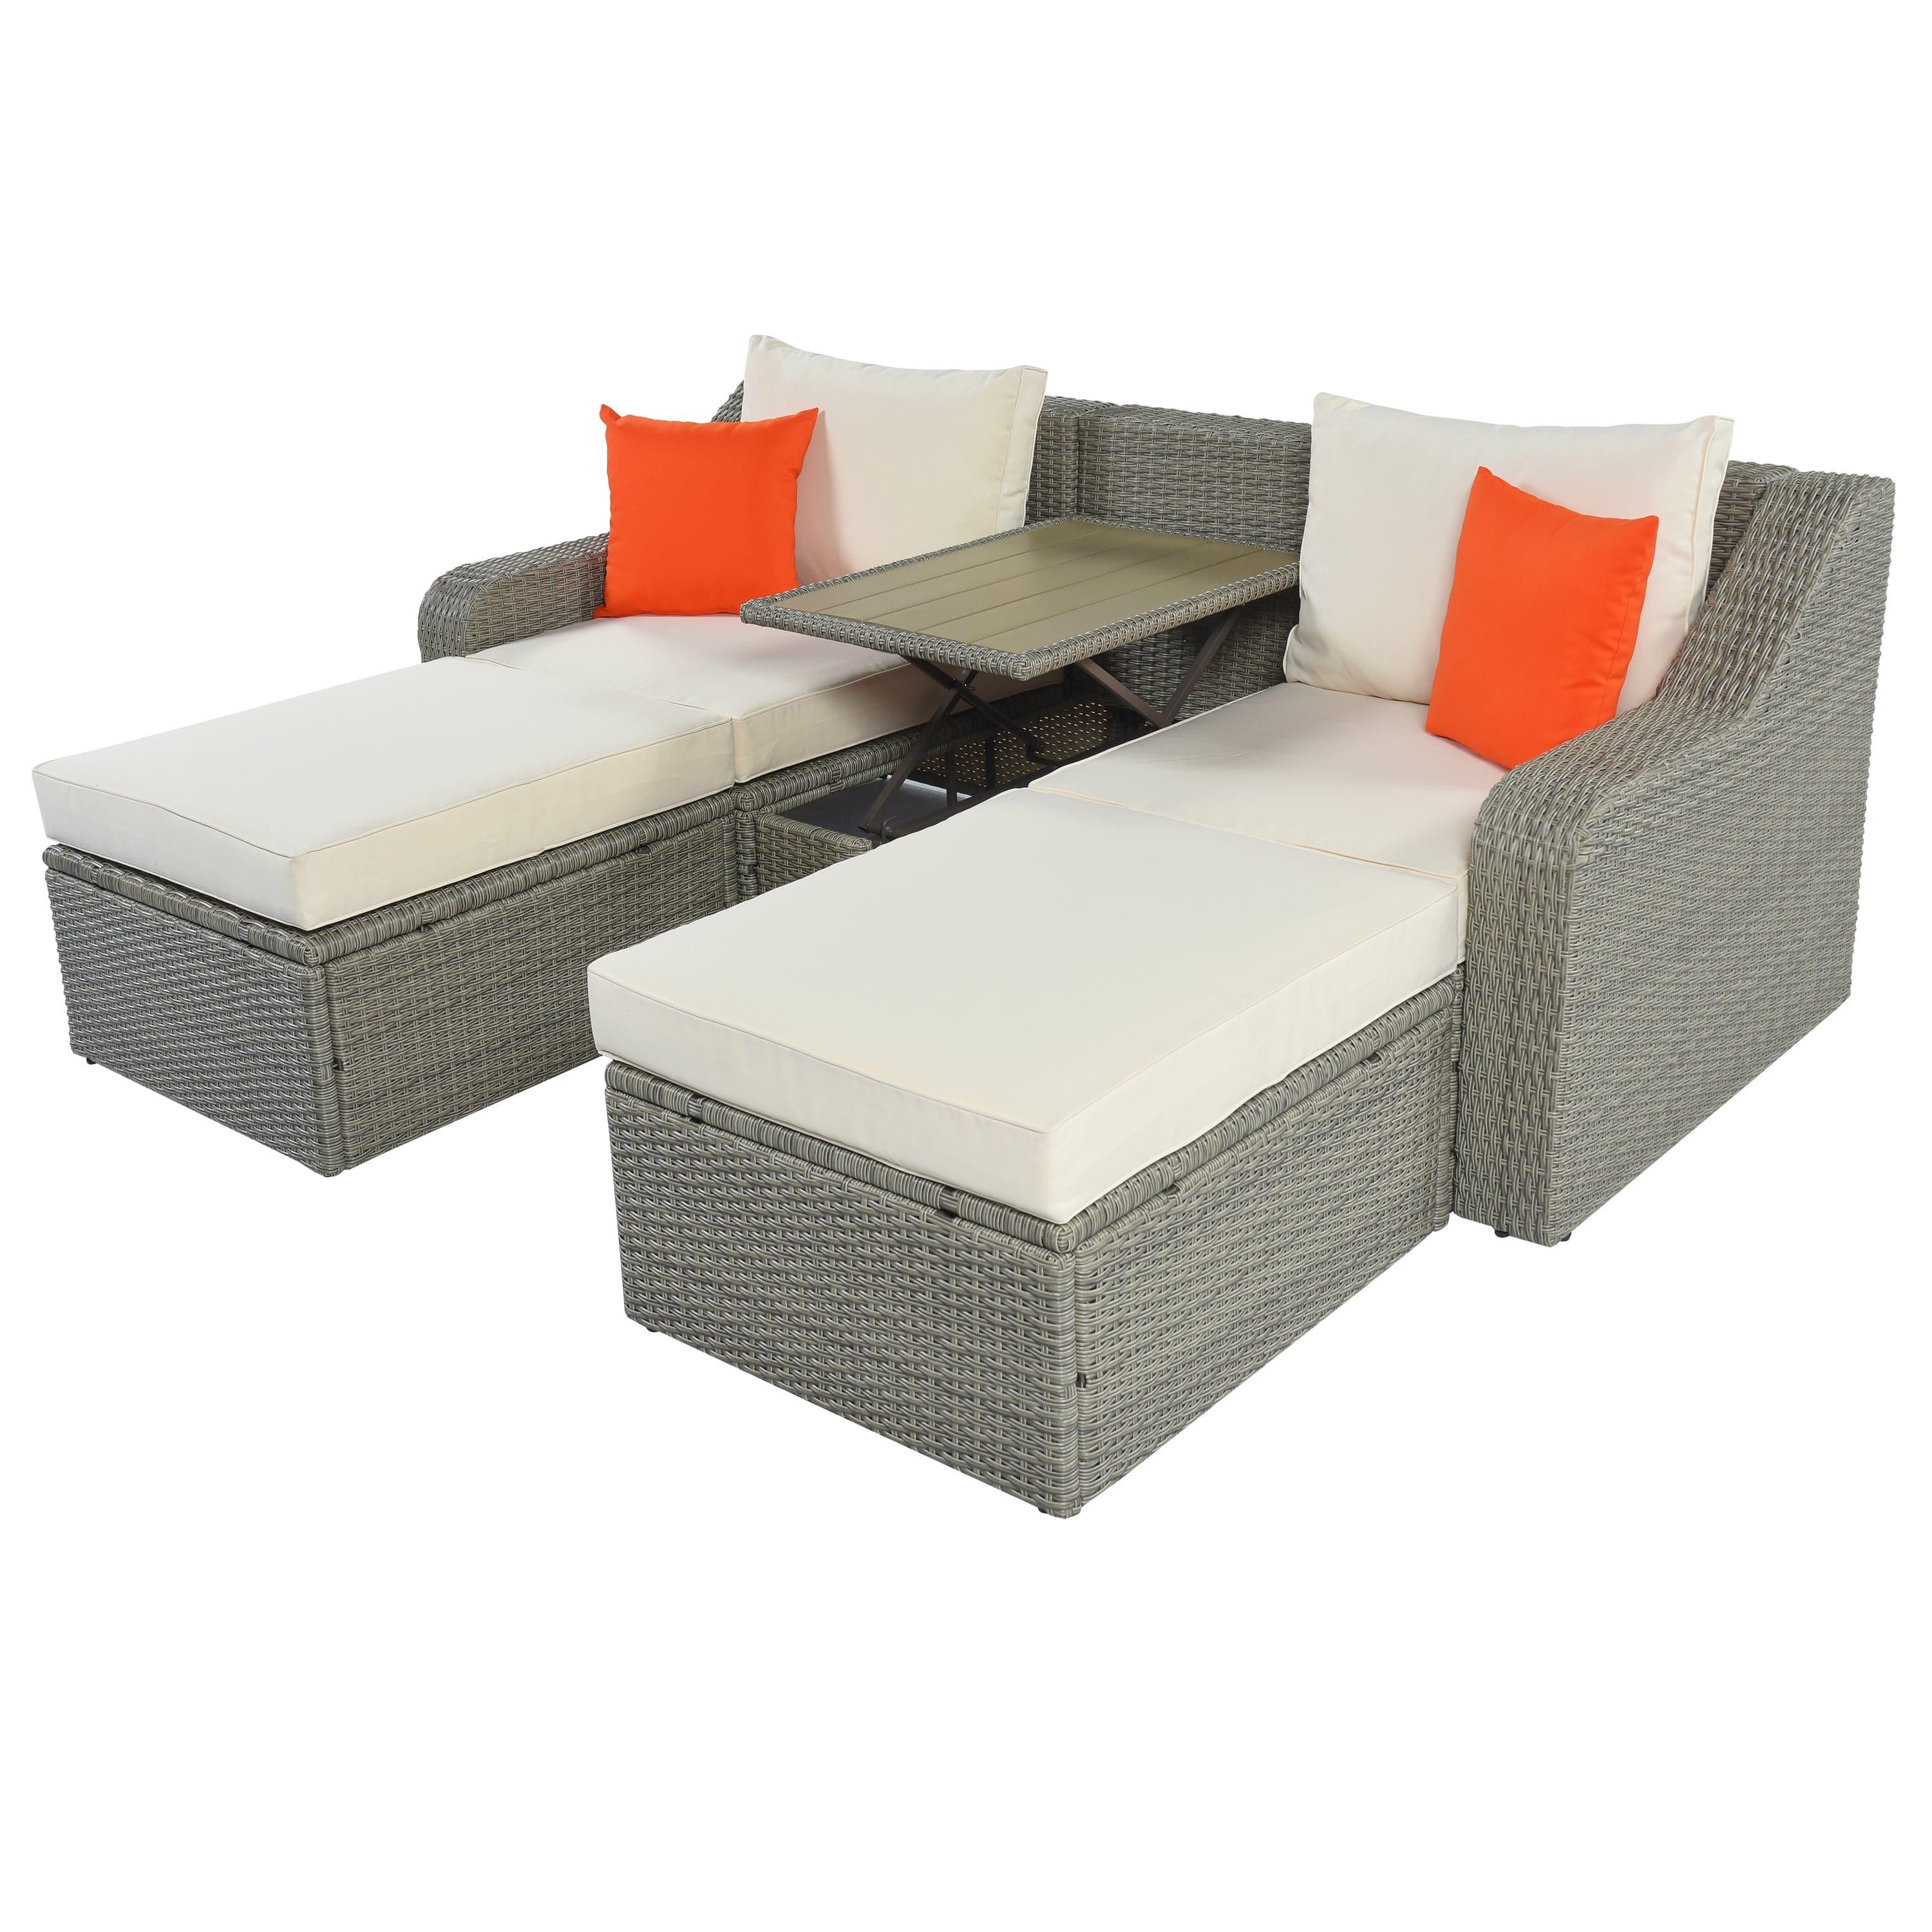 Shop U_STYLE Patio Furniture Sets, 3-Piece Patio Wicker Sofa with  Cushions, Pillows, Ottomans and Lift Top Coffee Table Mademoiselle Home Decor